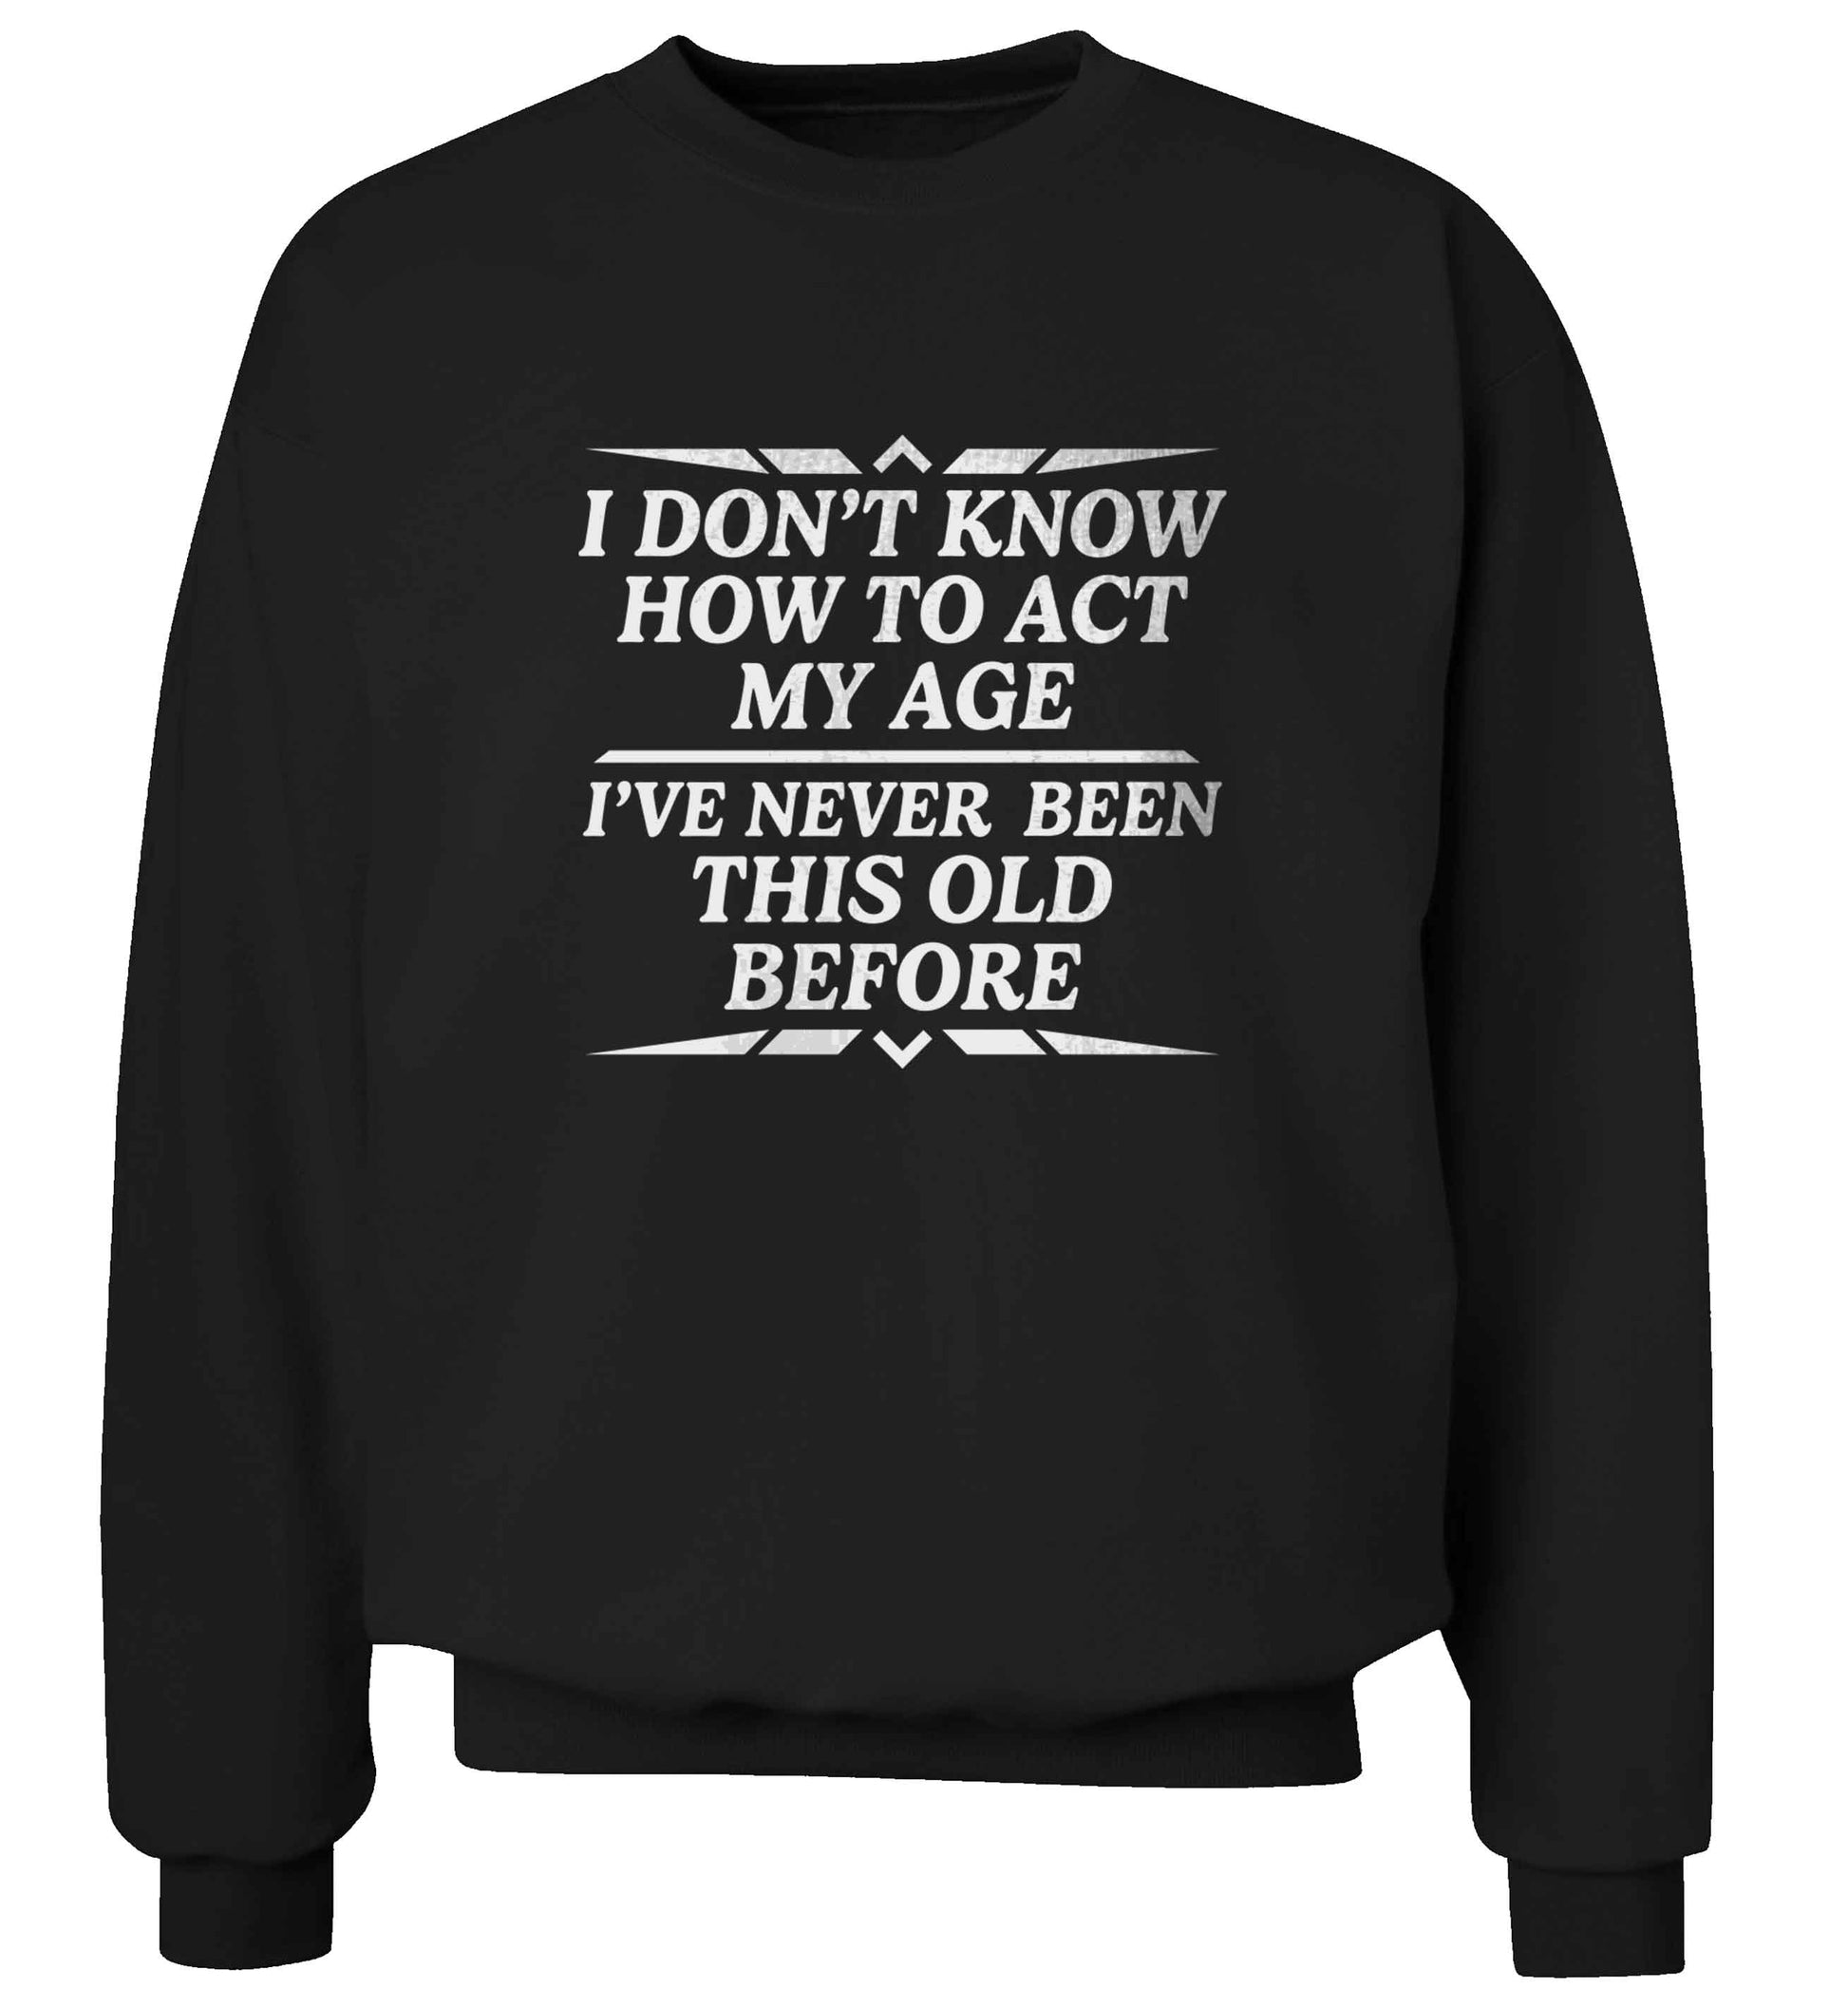 I don't know how to act my age I've never been this old before adult's unisex black sweater 2XL